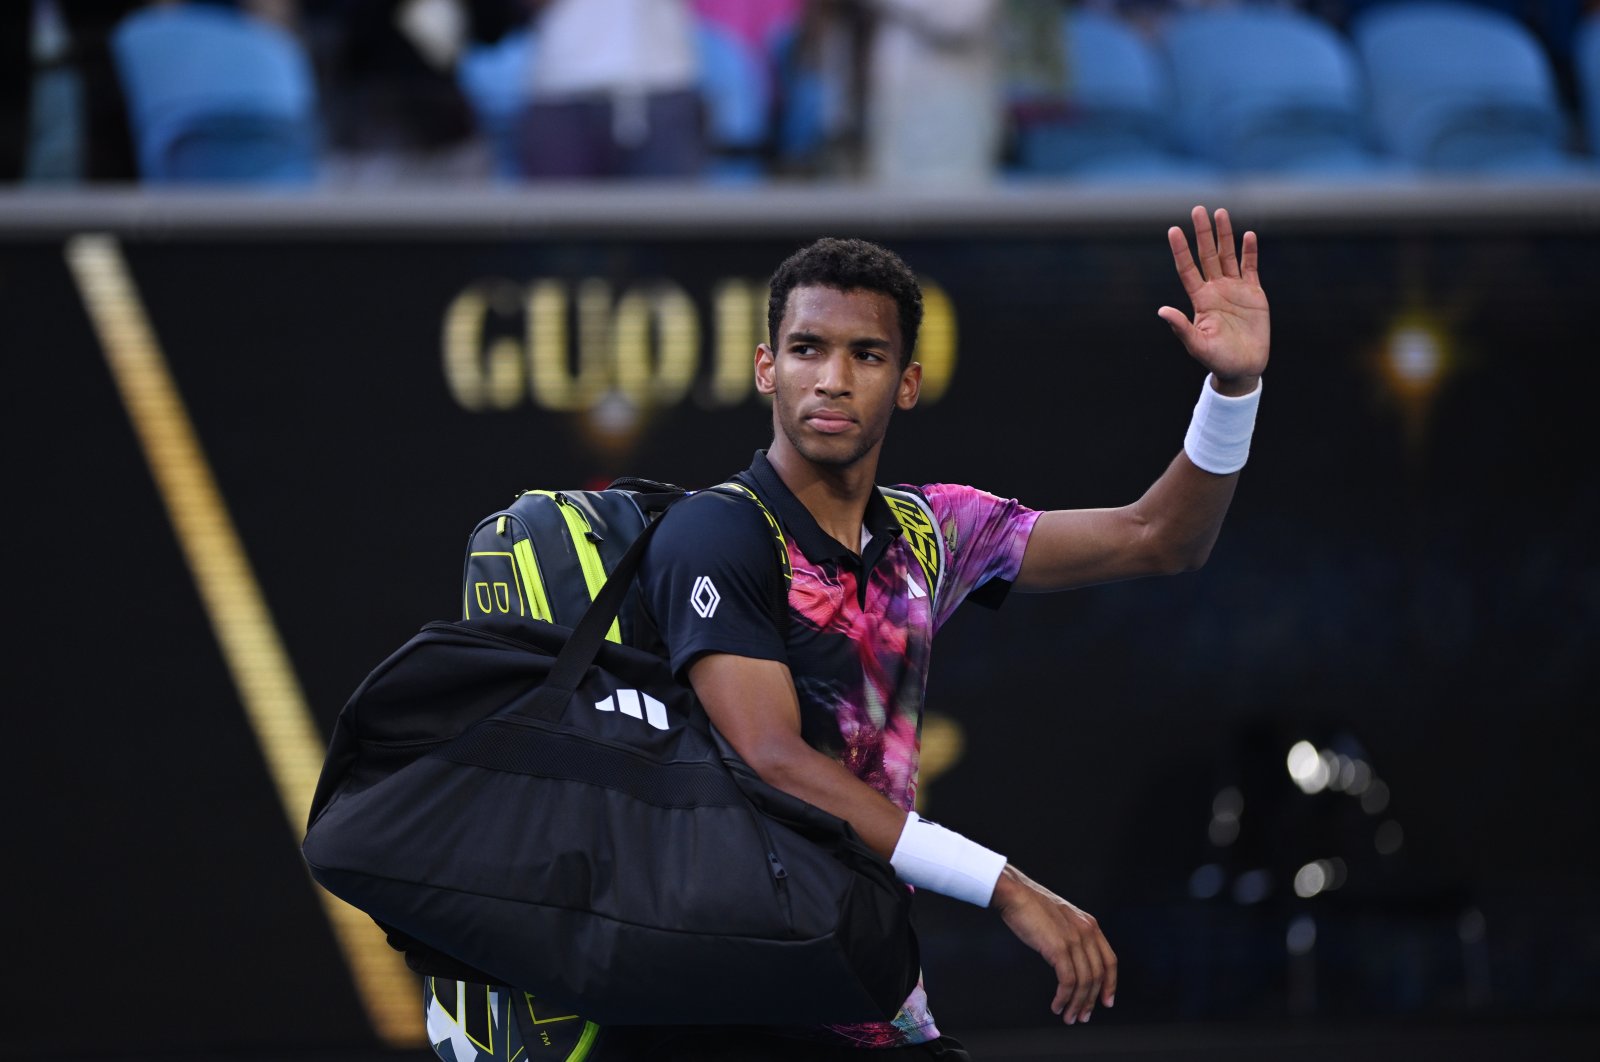 Canada&#039;s Felix Auger-Aliassime walks from the court following his loss to Czech Republic&#039;s Jiri Lehecka in the 4th round at the 2023 Australian Open tennis tournament, Melbourne, Australia, Jan. 22, 2023. (EPA Photo)